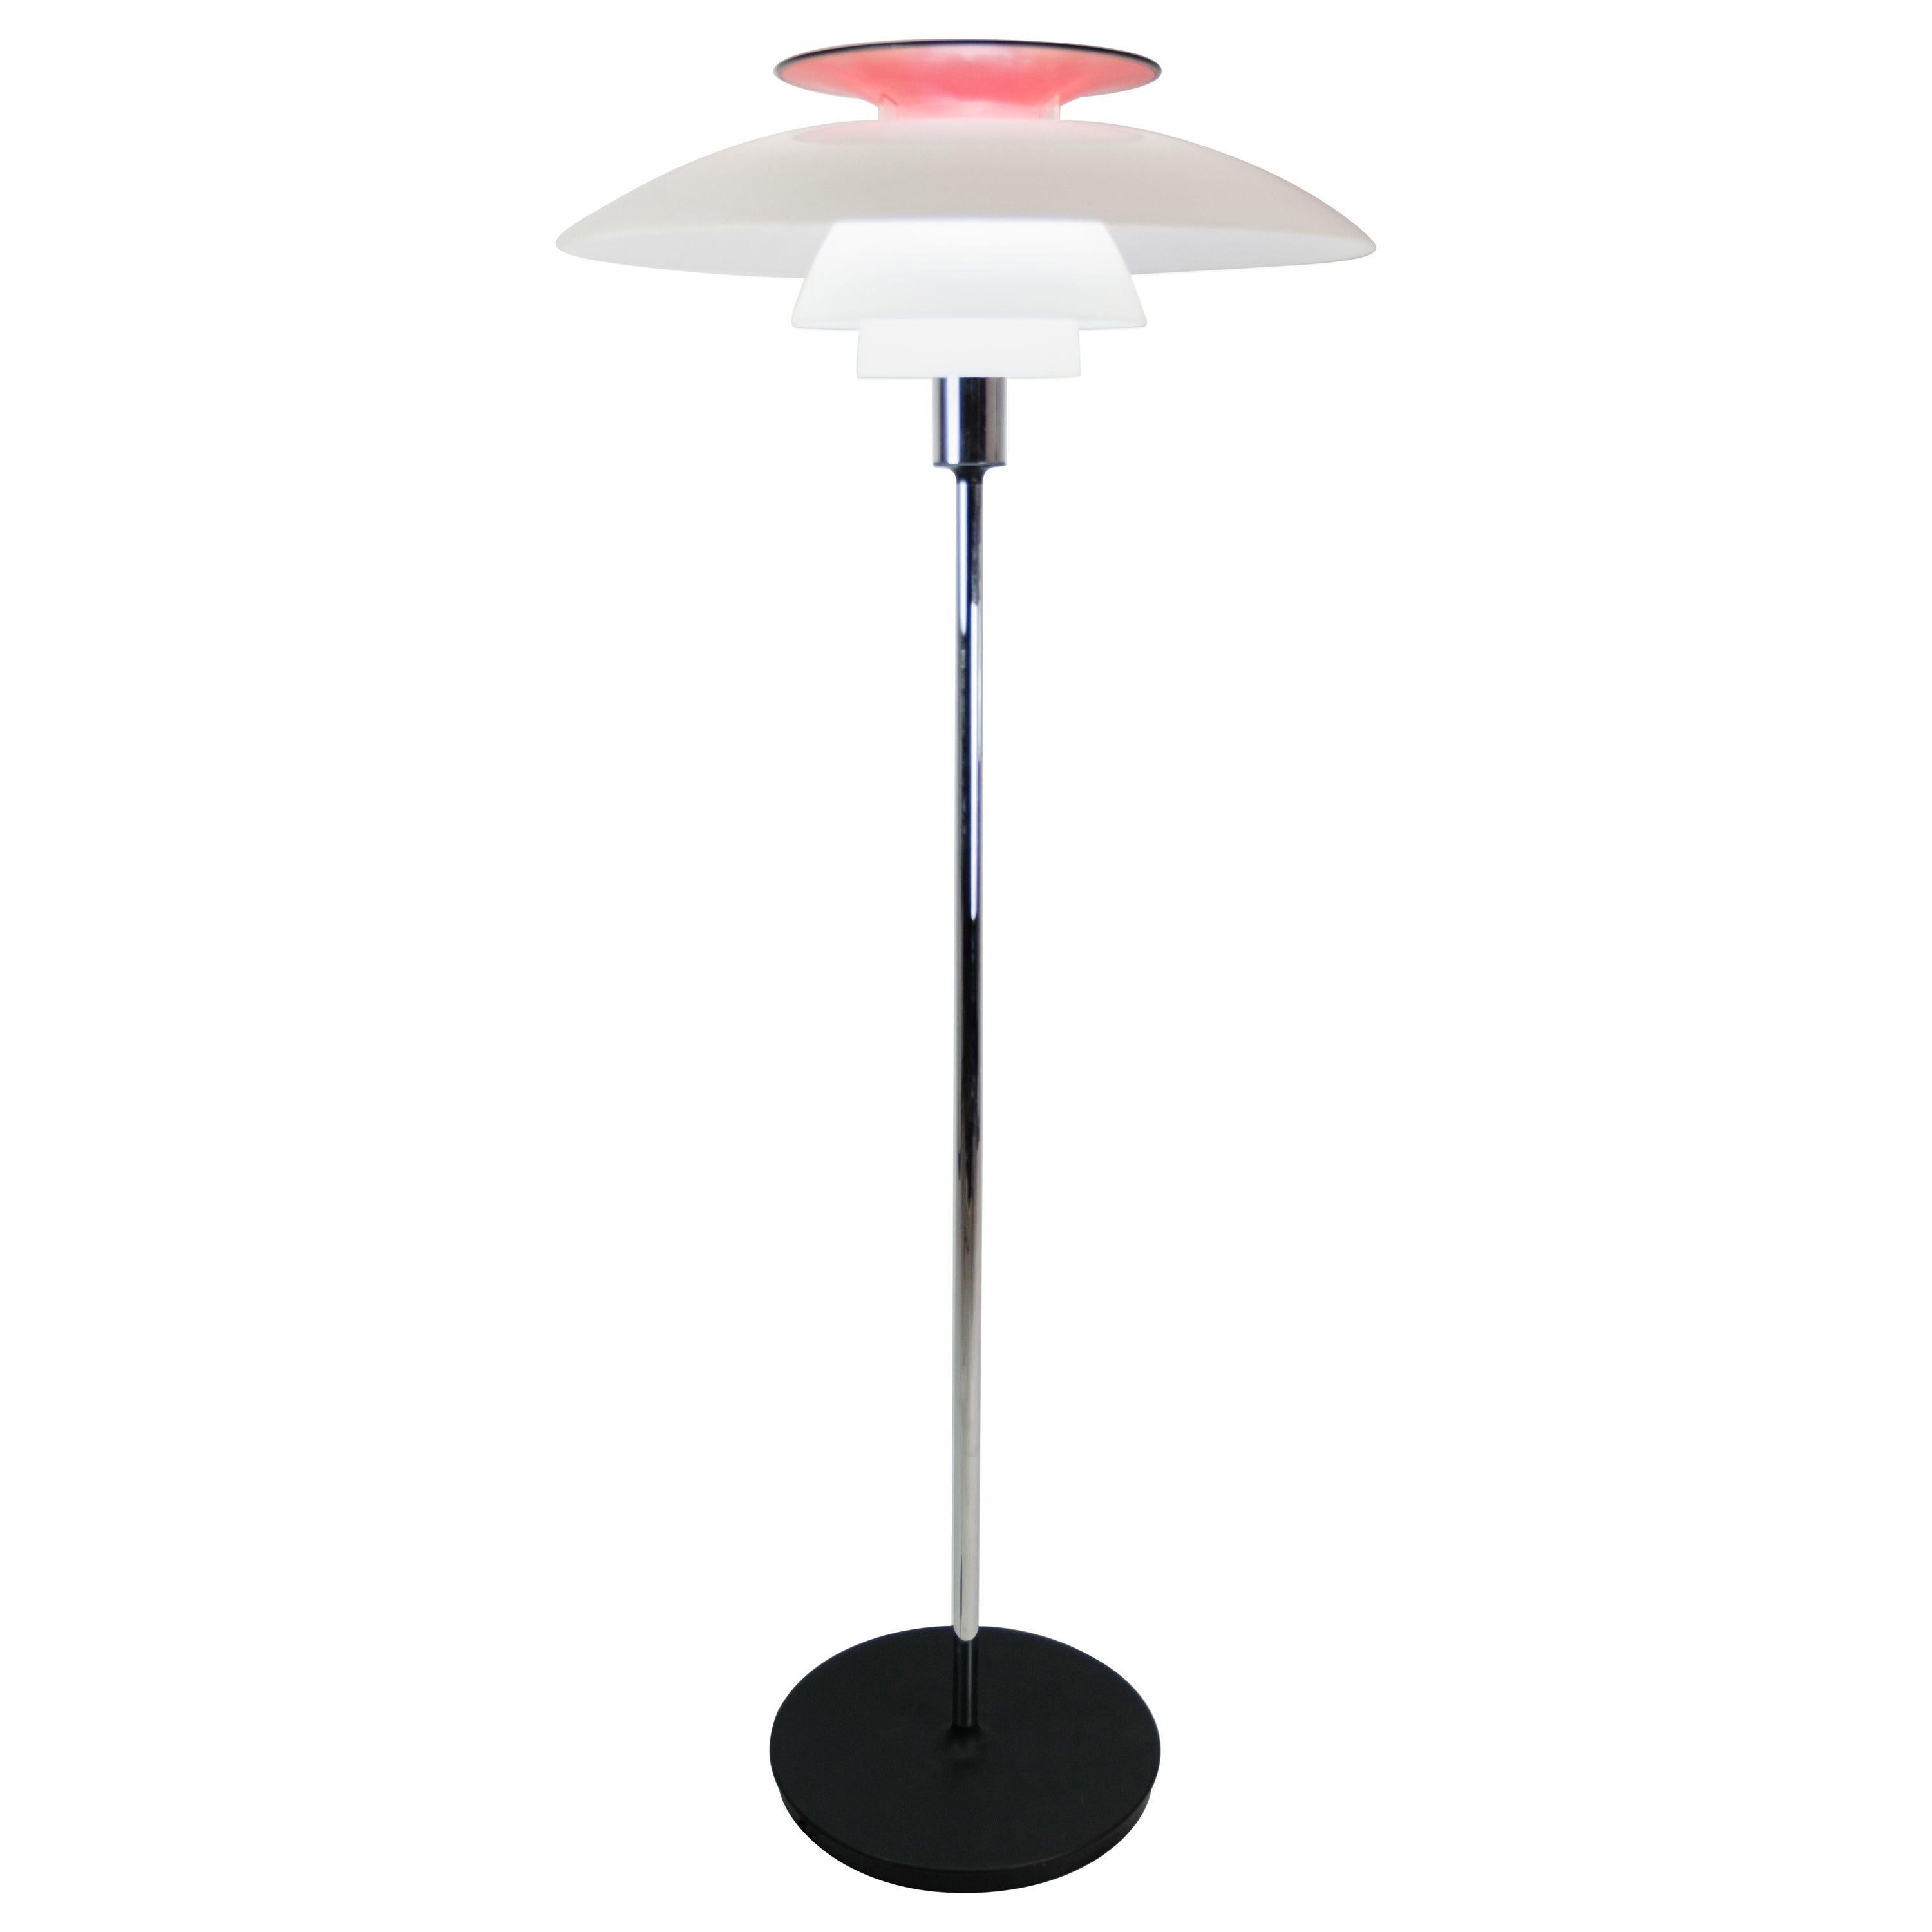 PH Floor Lamp Model PH80 By Poul Henningsen Made By Louis Poulsen From 1974s For Sale